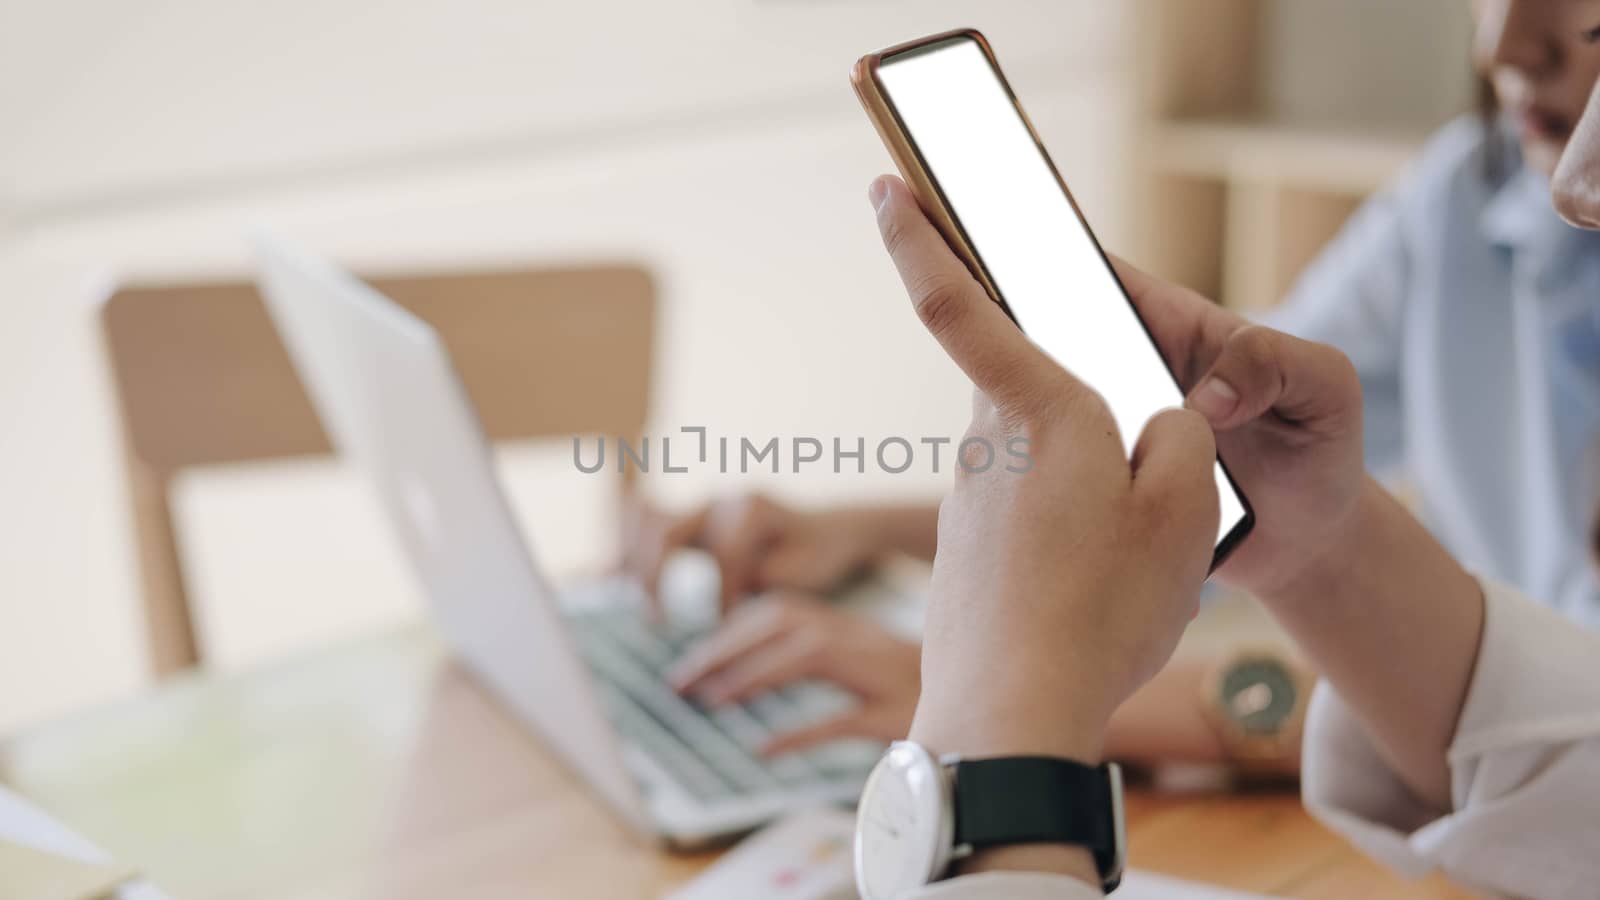 Close-up of smartphone with blank screen in hands of young woman sitting at white table and touching screen.